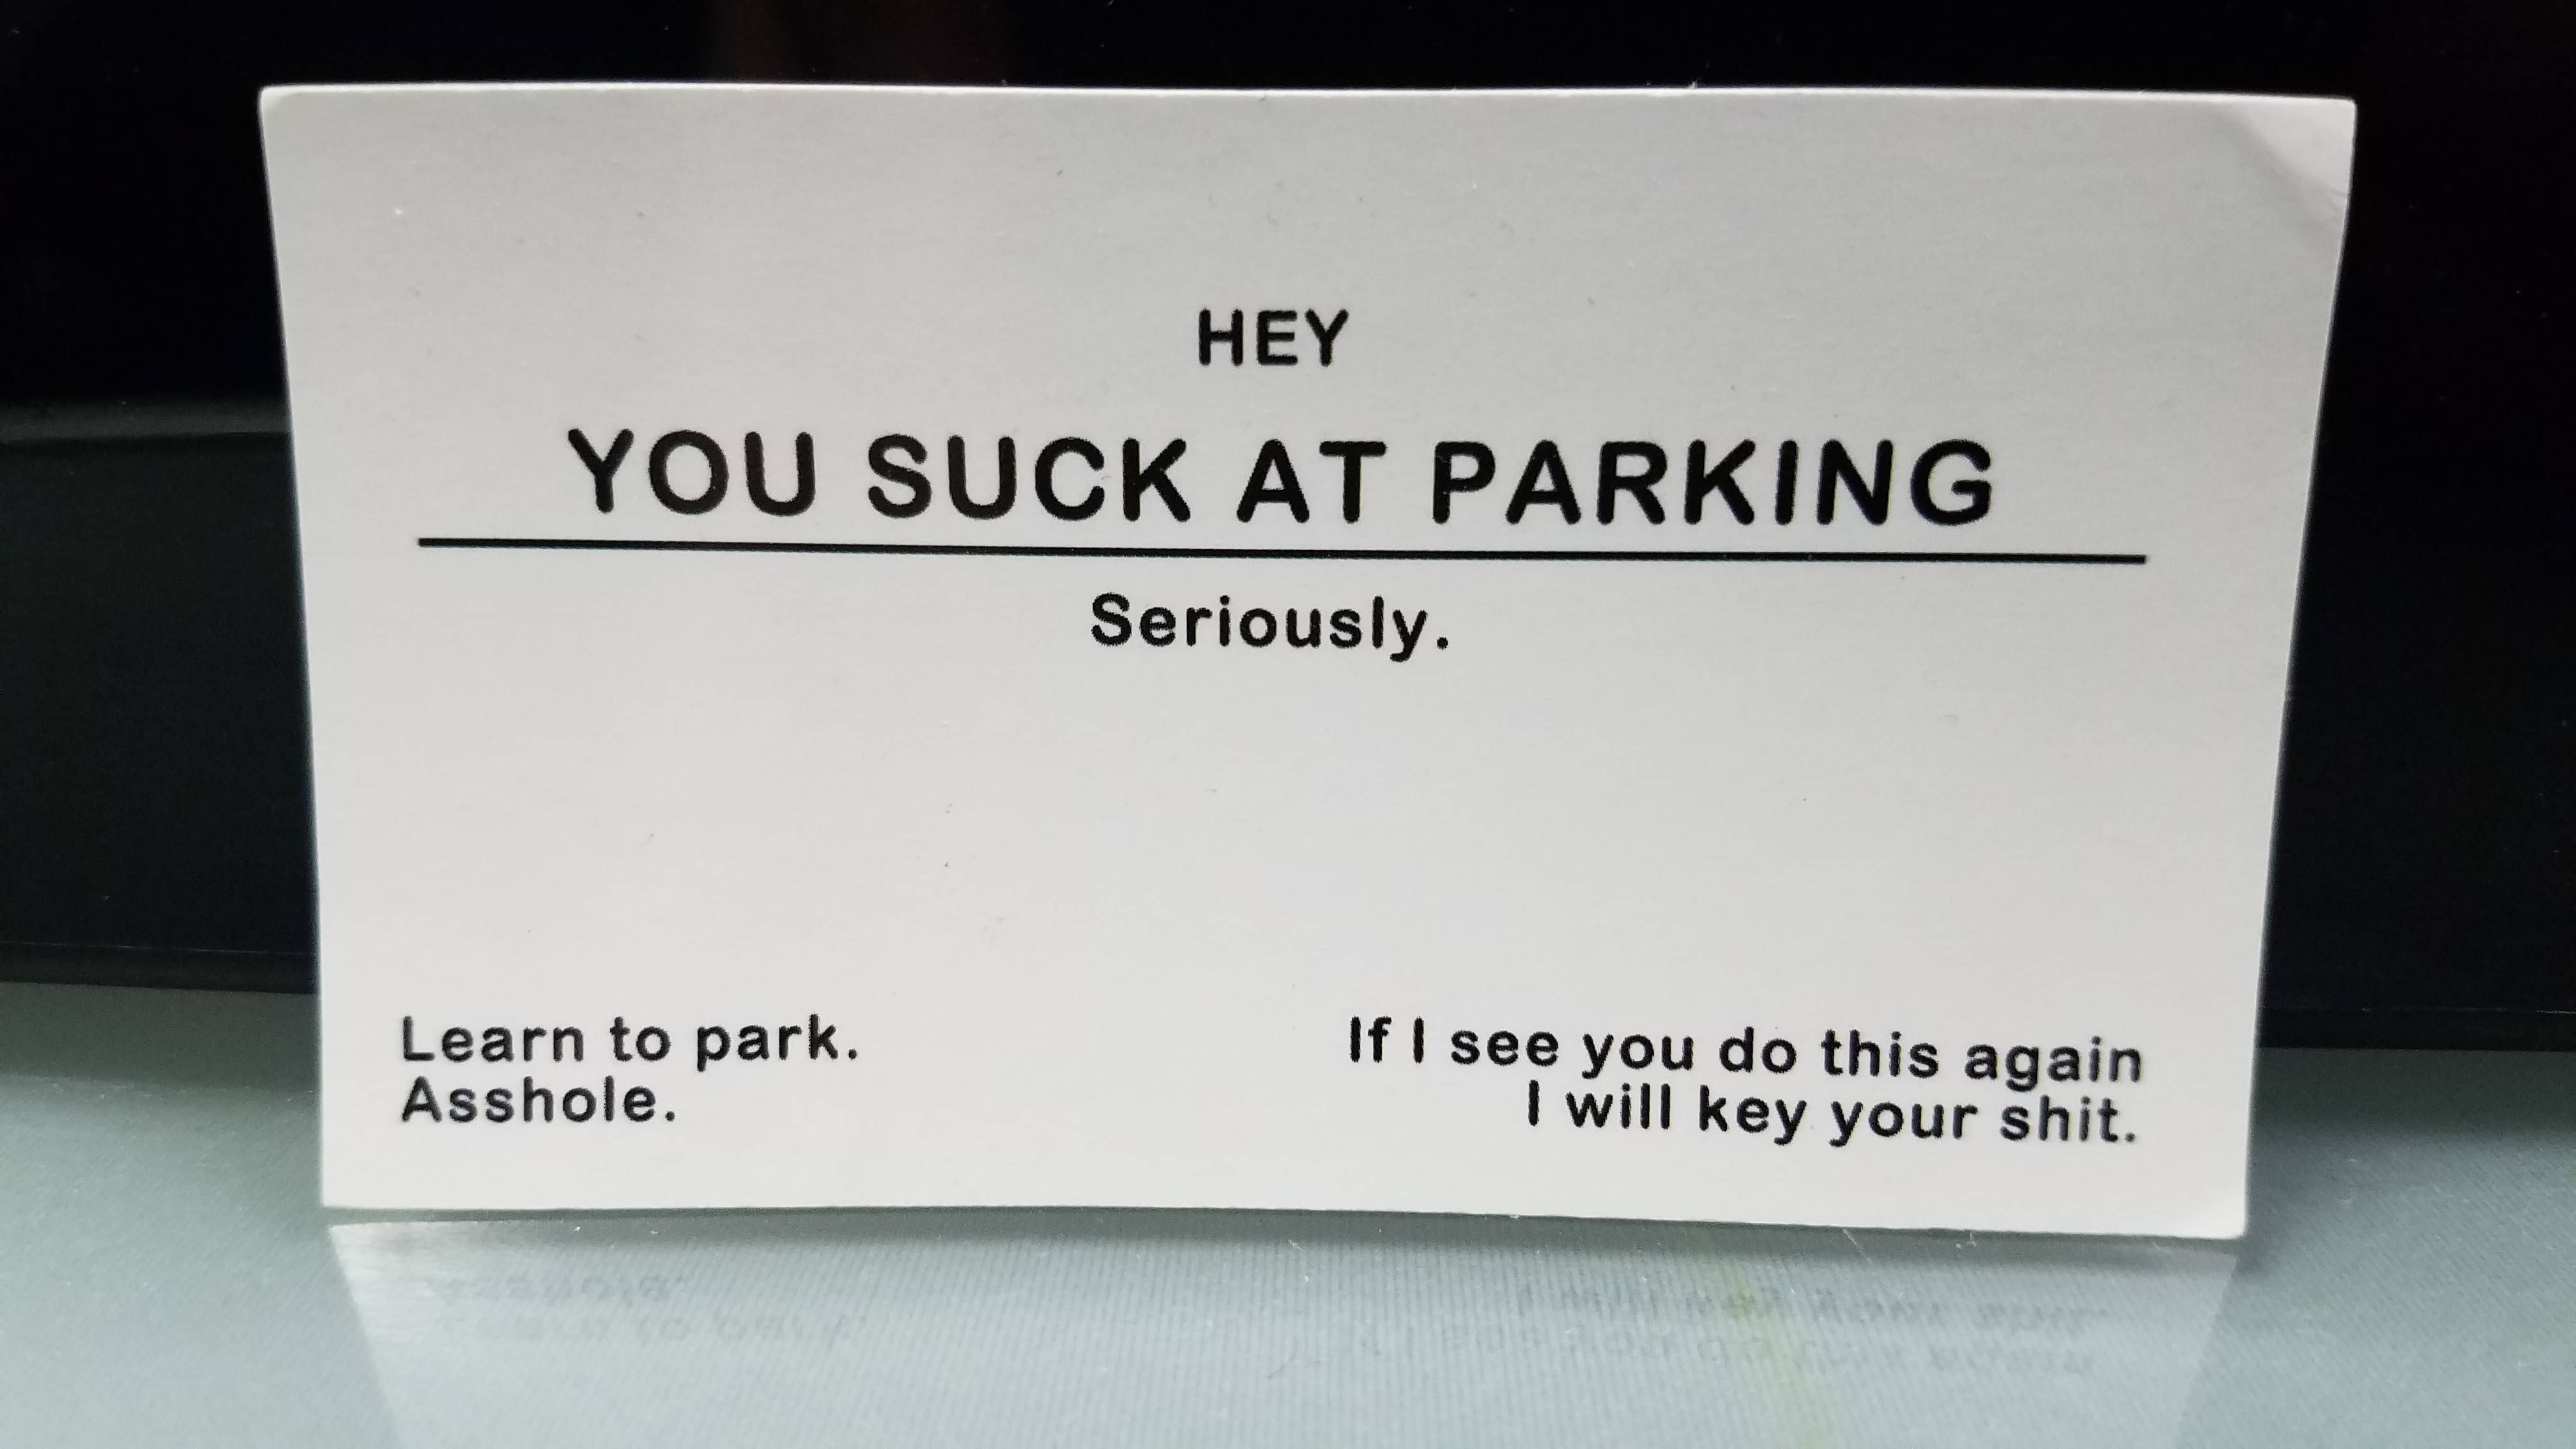 A co-worker got this on her car.